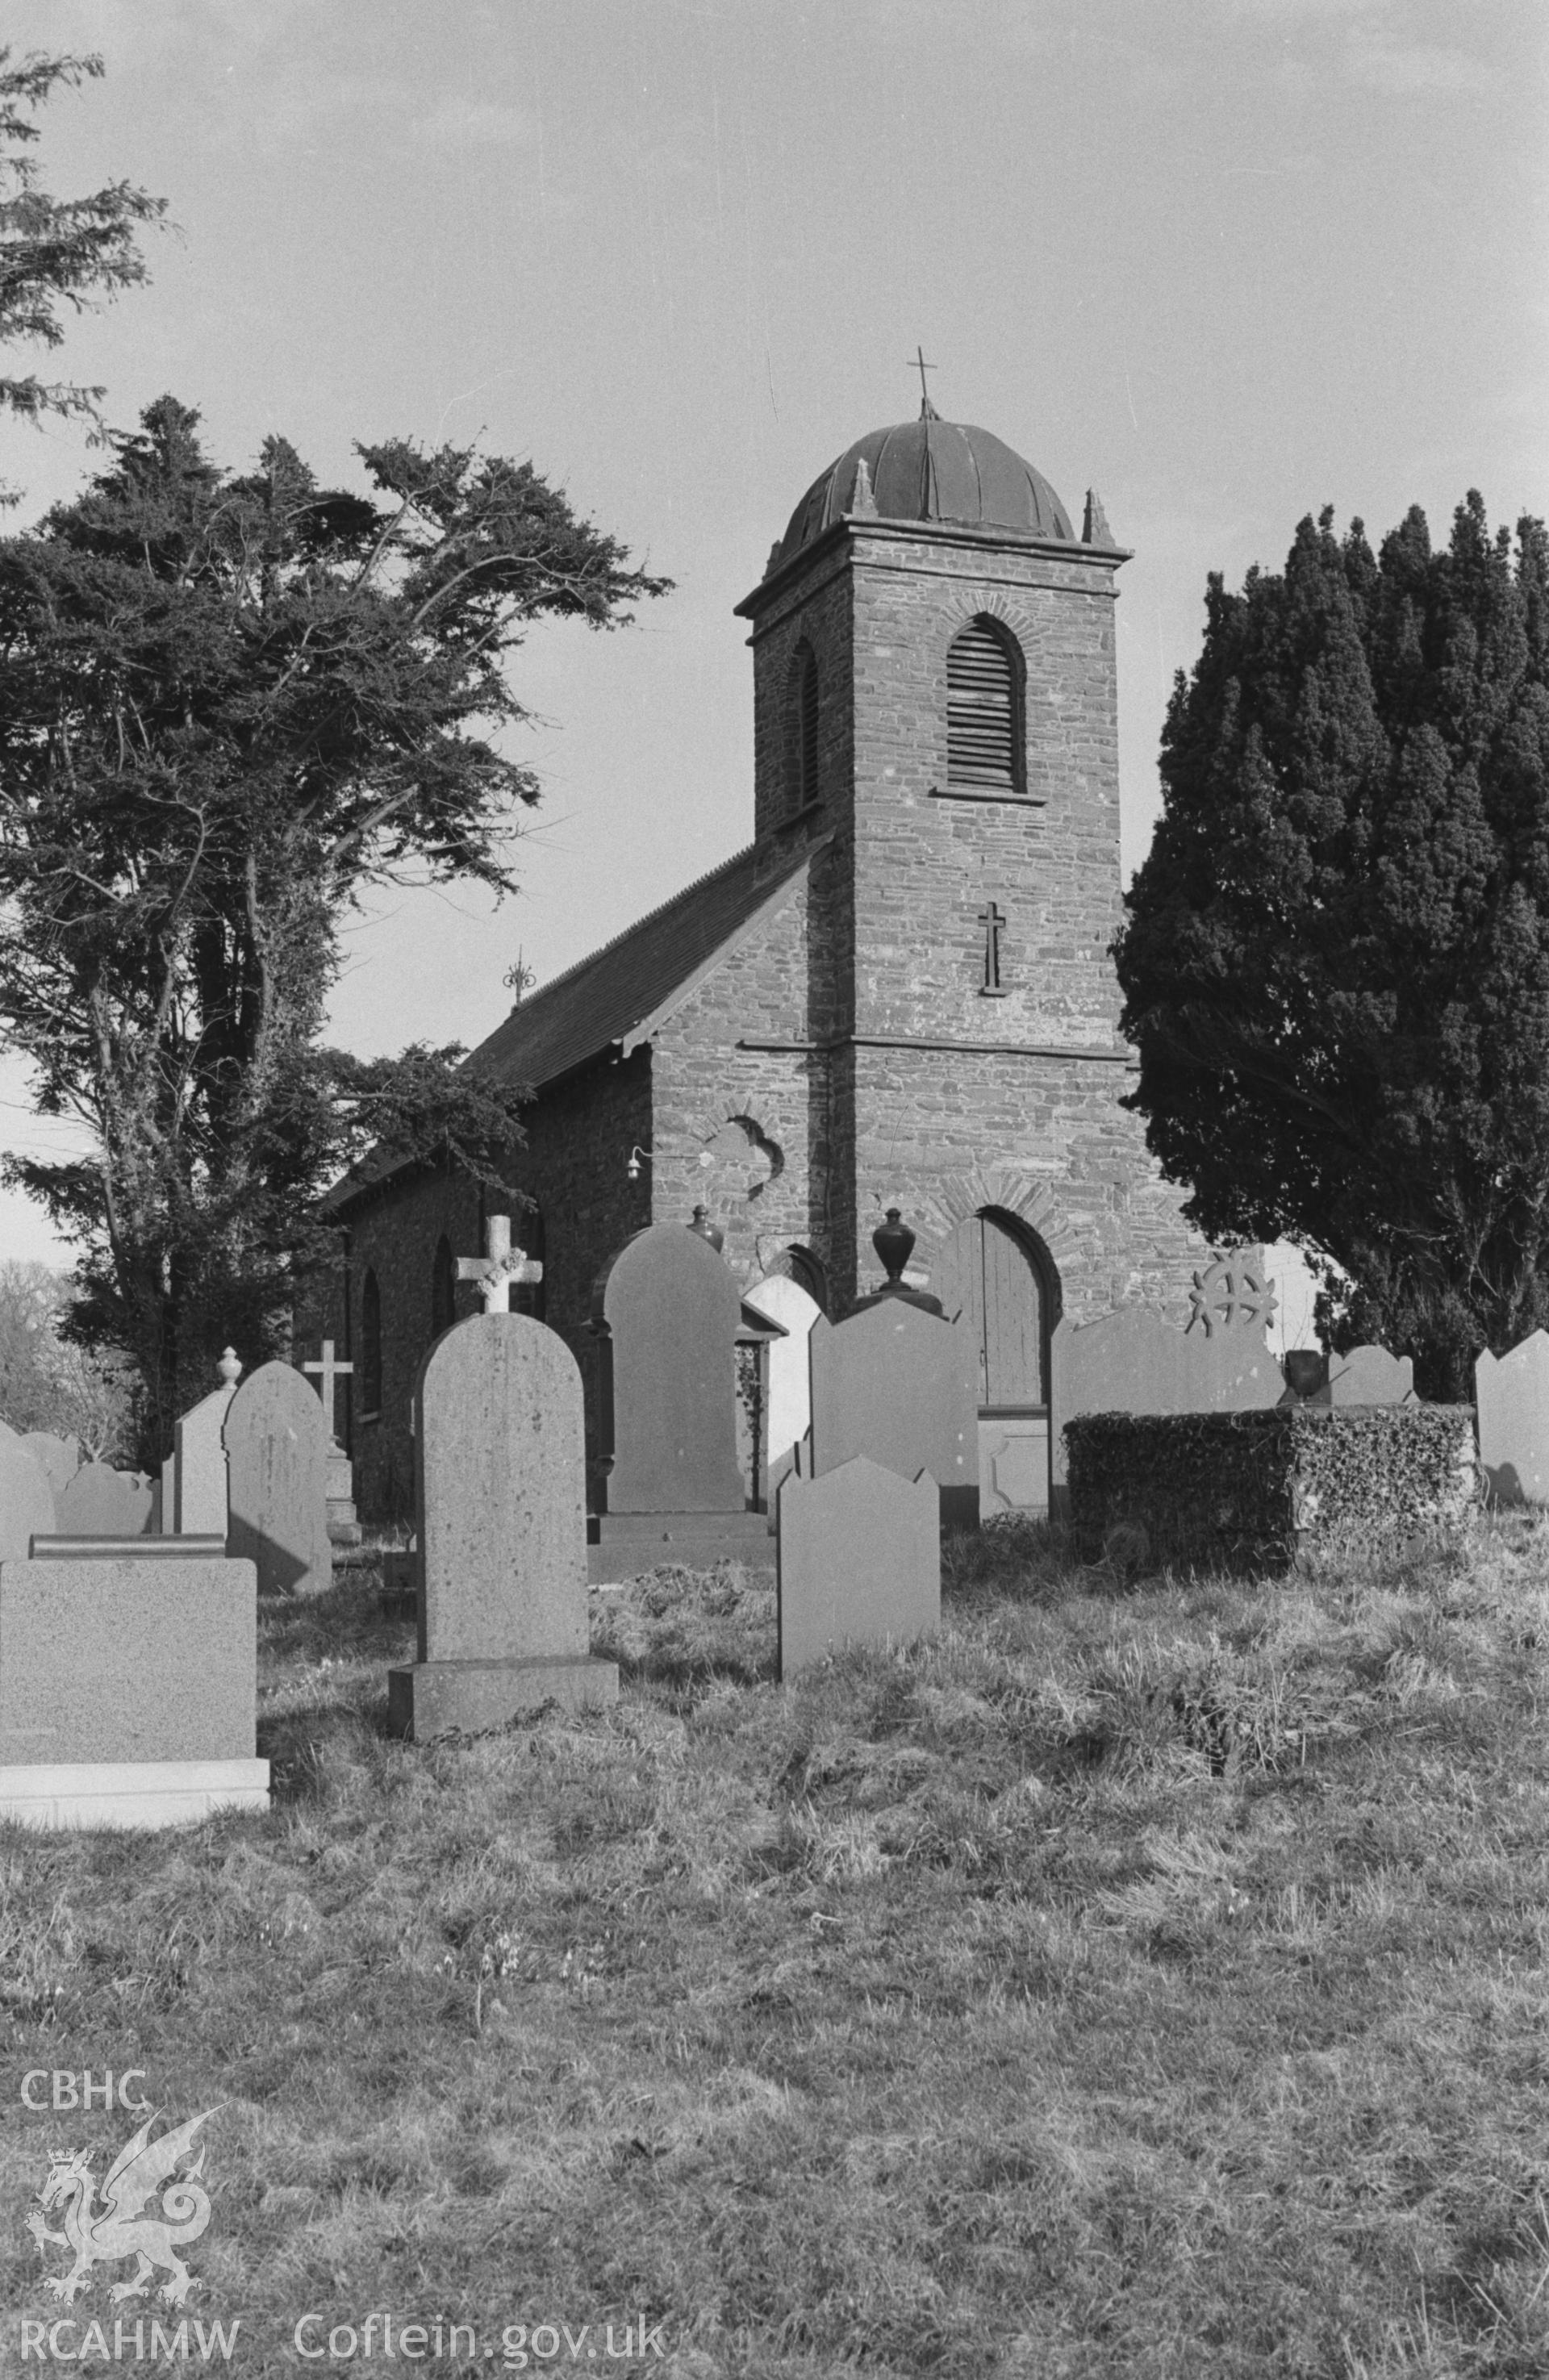 Black and White photograph showing St Non's church from the corner of the churchyard, Llanerchaeron. Photographed by Arthur Chater in April 1963 from Grid Reference SN 477 604, looking south east.